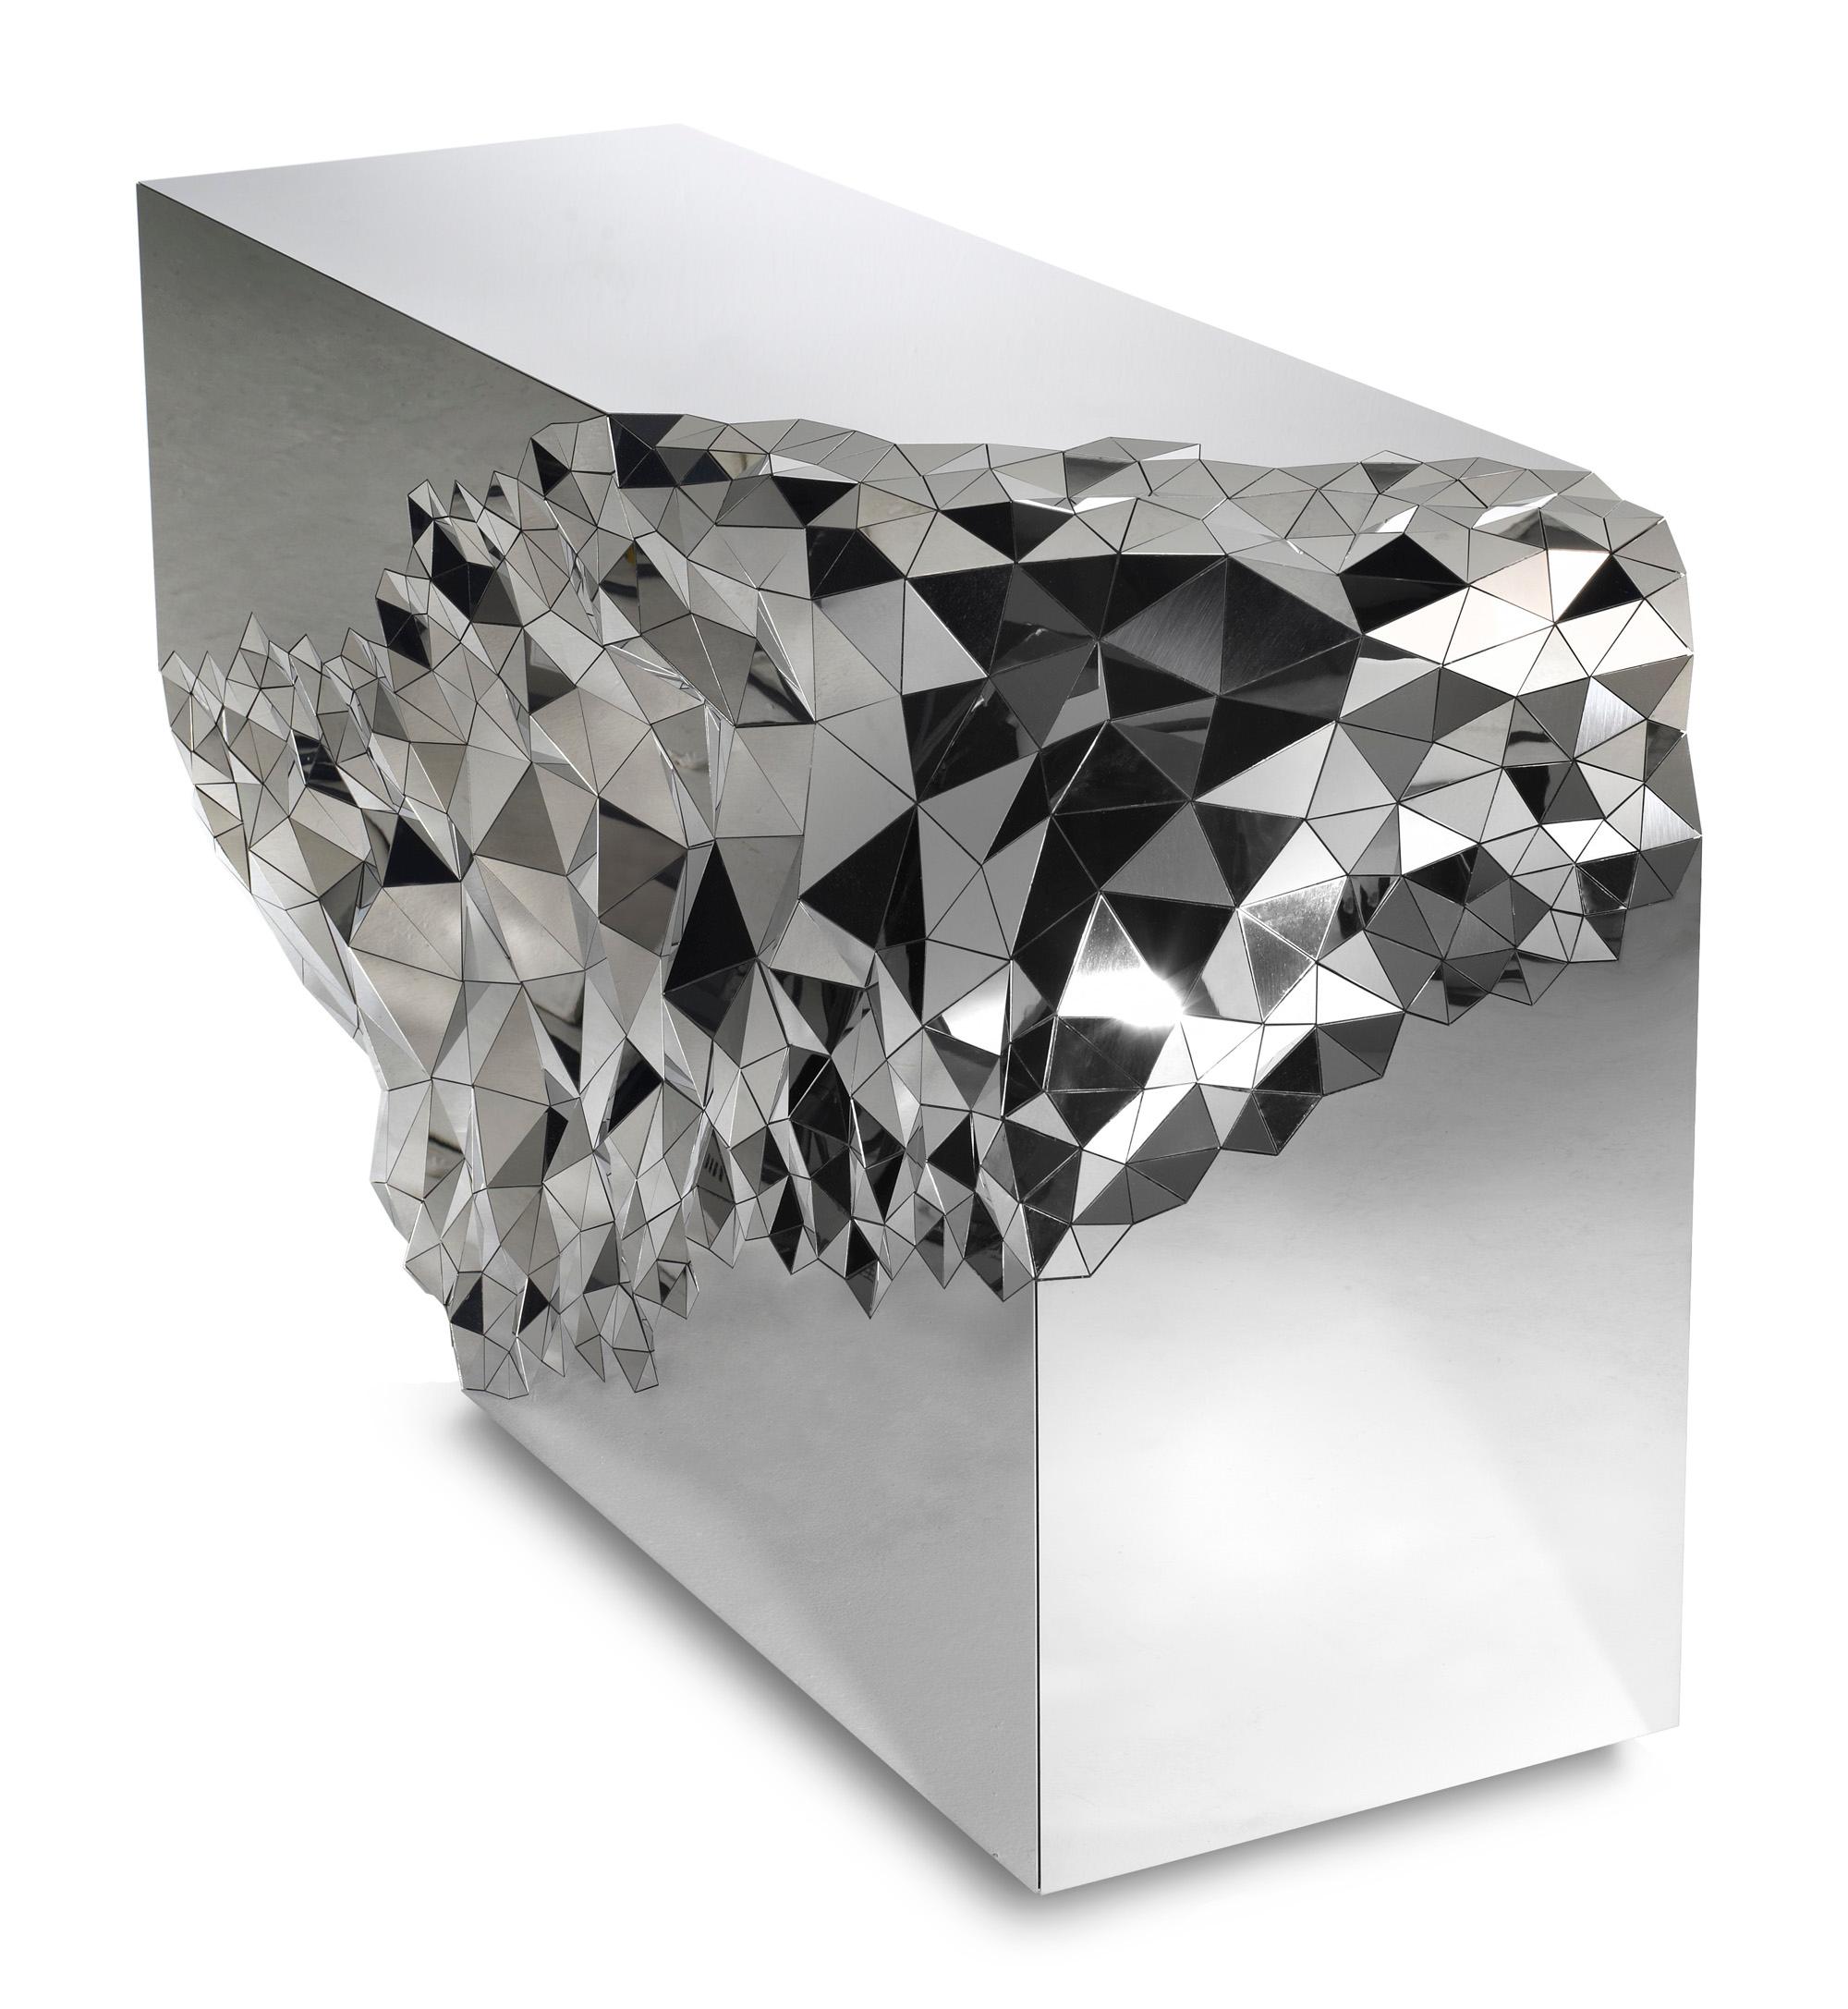 Part of the award winning Stellar Collection - the Stellar Console Table is inspired by the precious qualities of naturally forming amethyst geodes and machine cut diamonds.  The large expansive surfaces on the table are in stark contrast to the